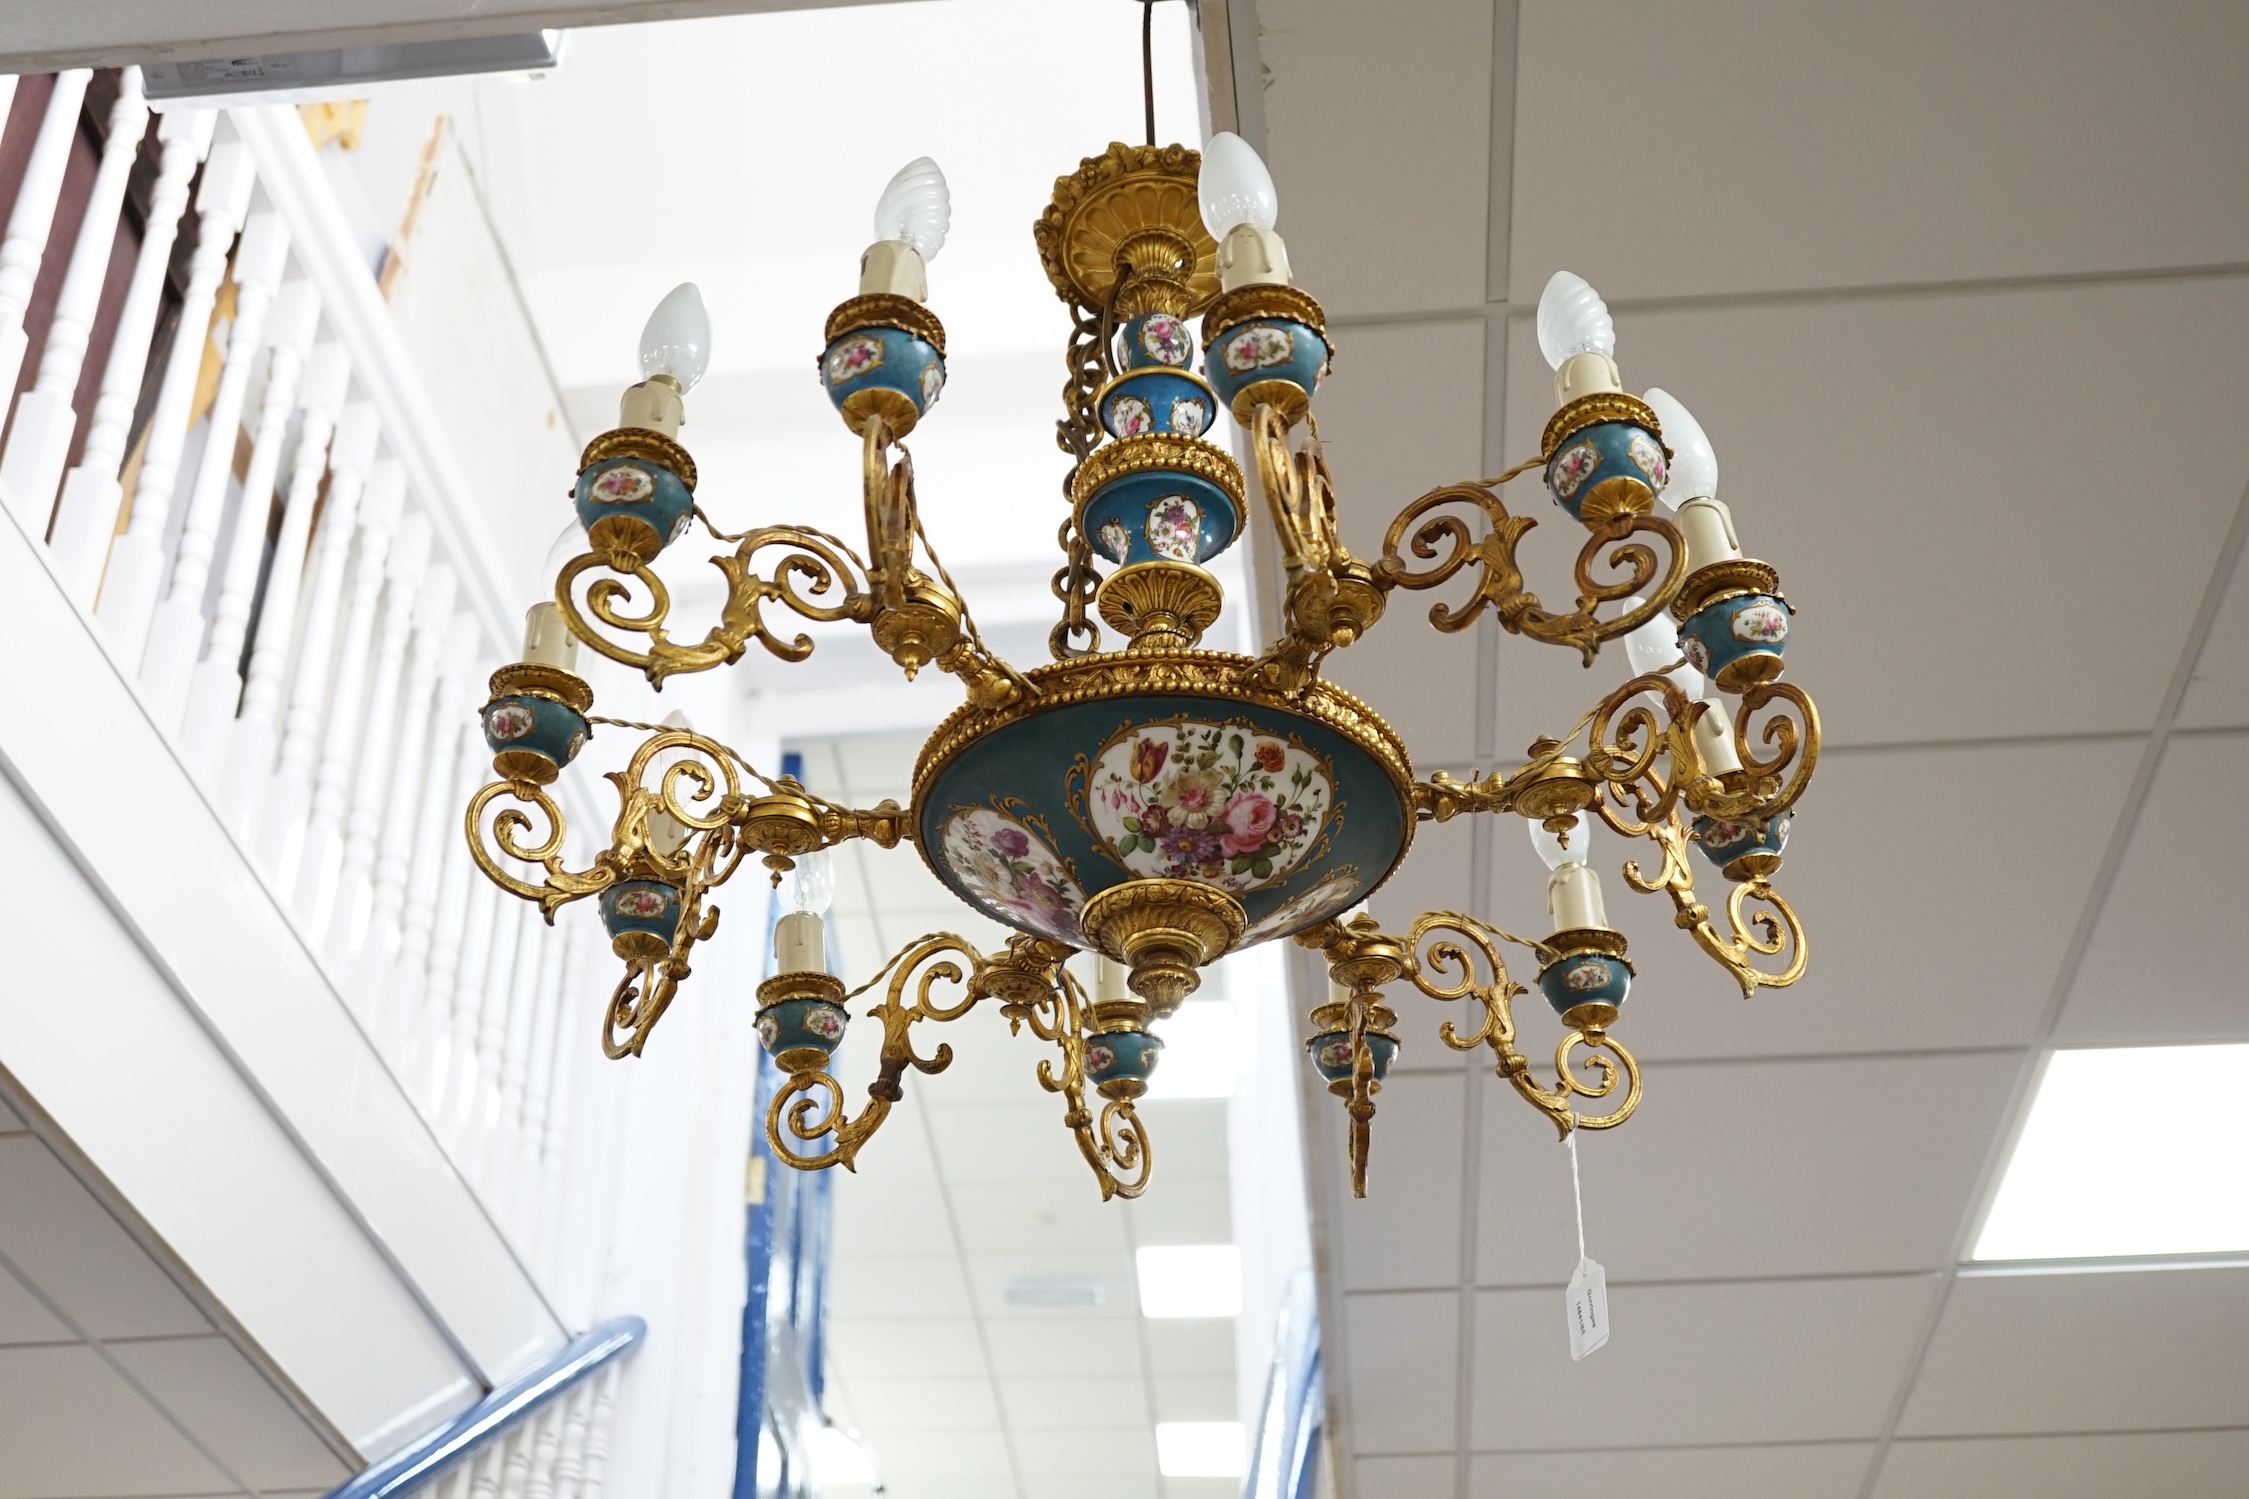 A Sevres style porcelain and gilt metal mounted twelve light chandelier, late 19th / 20th century, 60cm high excluding chain. Condition - fair